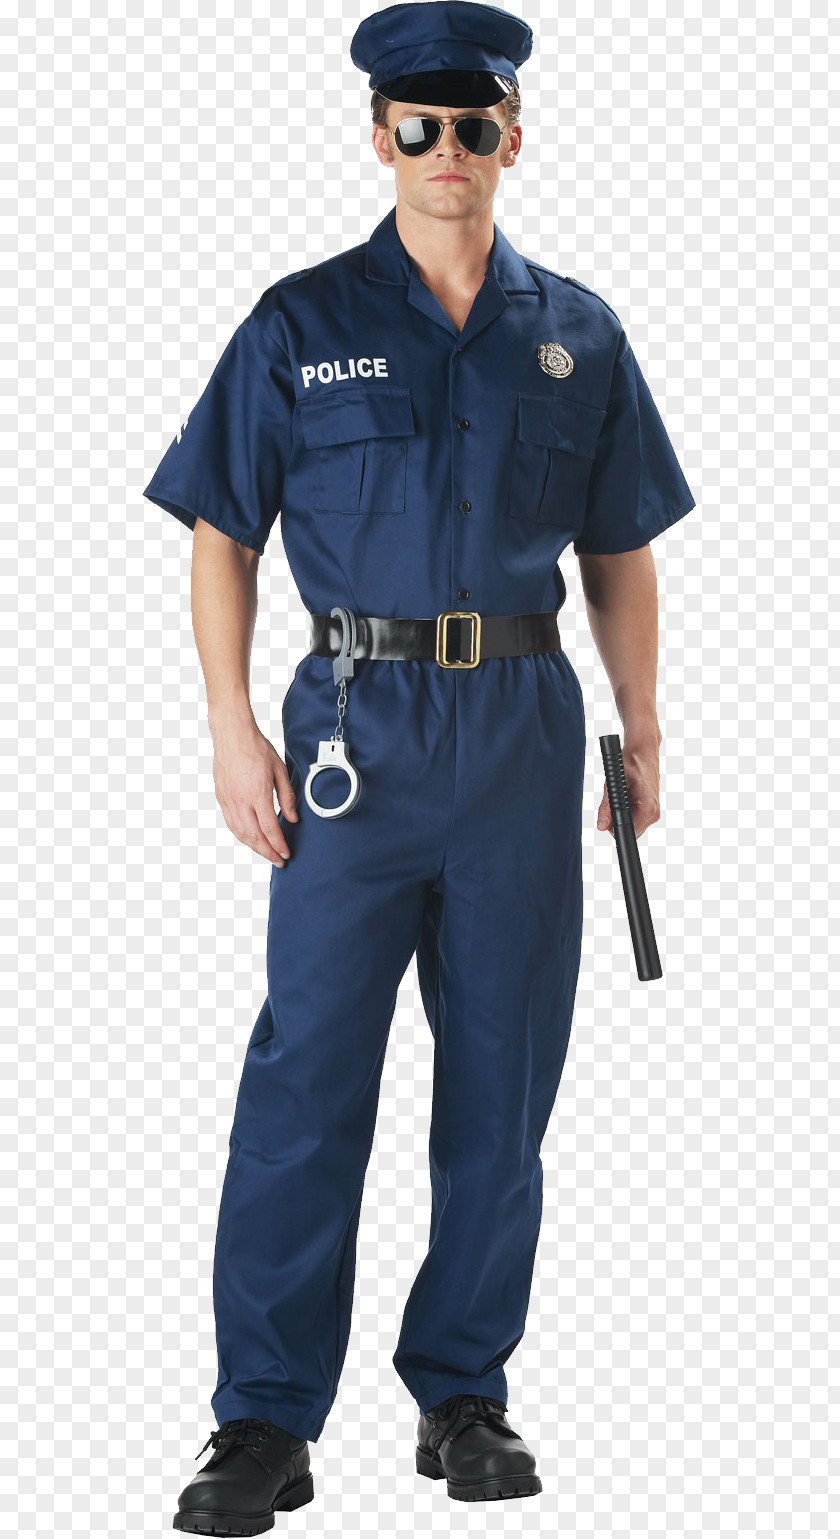 Policeman Costume T-shirt Police Officer Clothing Amazon.com PNG